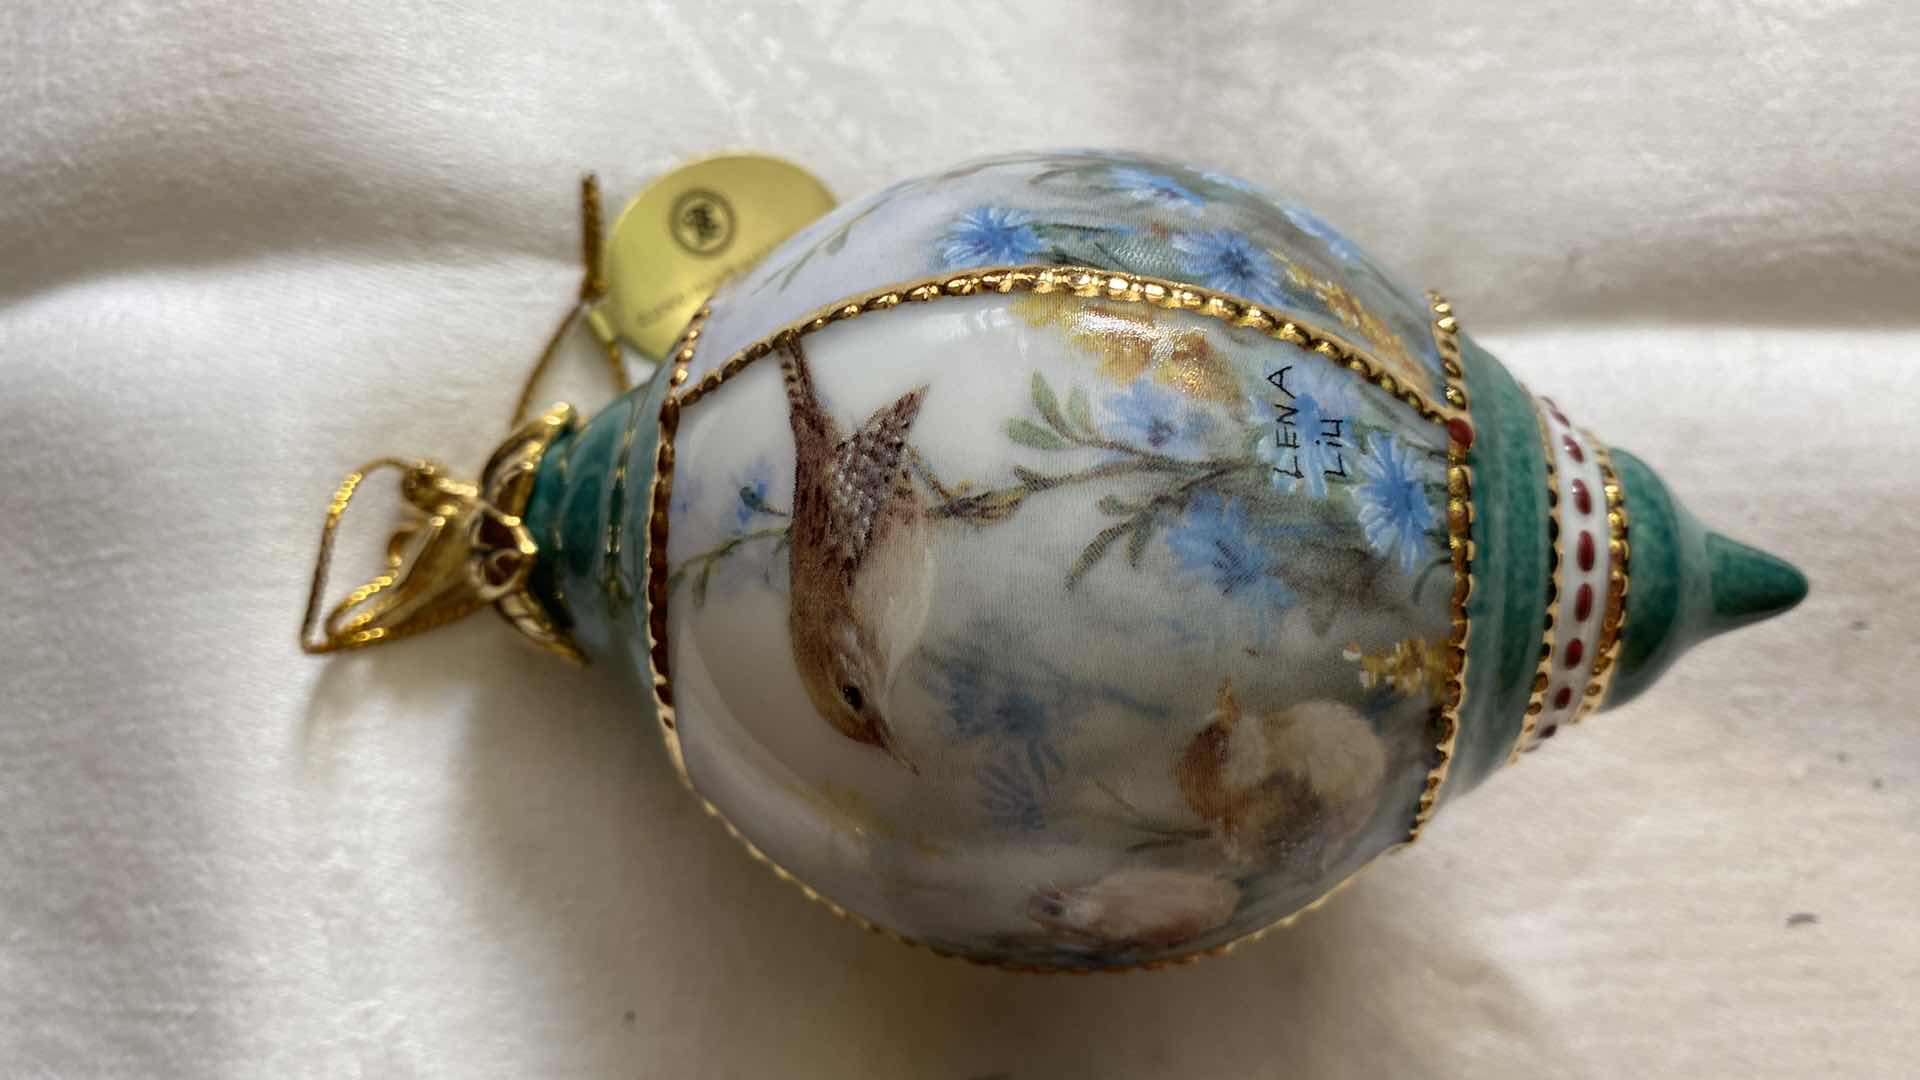 Photo 5 of $68.50 VINTAGE THREE LENA LIU’s NATURES POETRY PORCELAIN ORNAMENTS COLLECTIBLES BY BRADFORD EXCHANGE WITH CERTIFICATE OF AUTHENTICITY